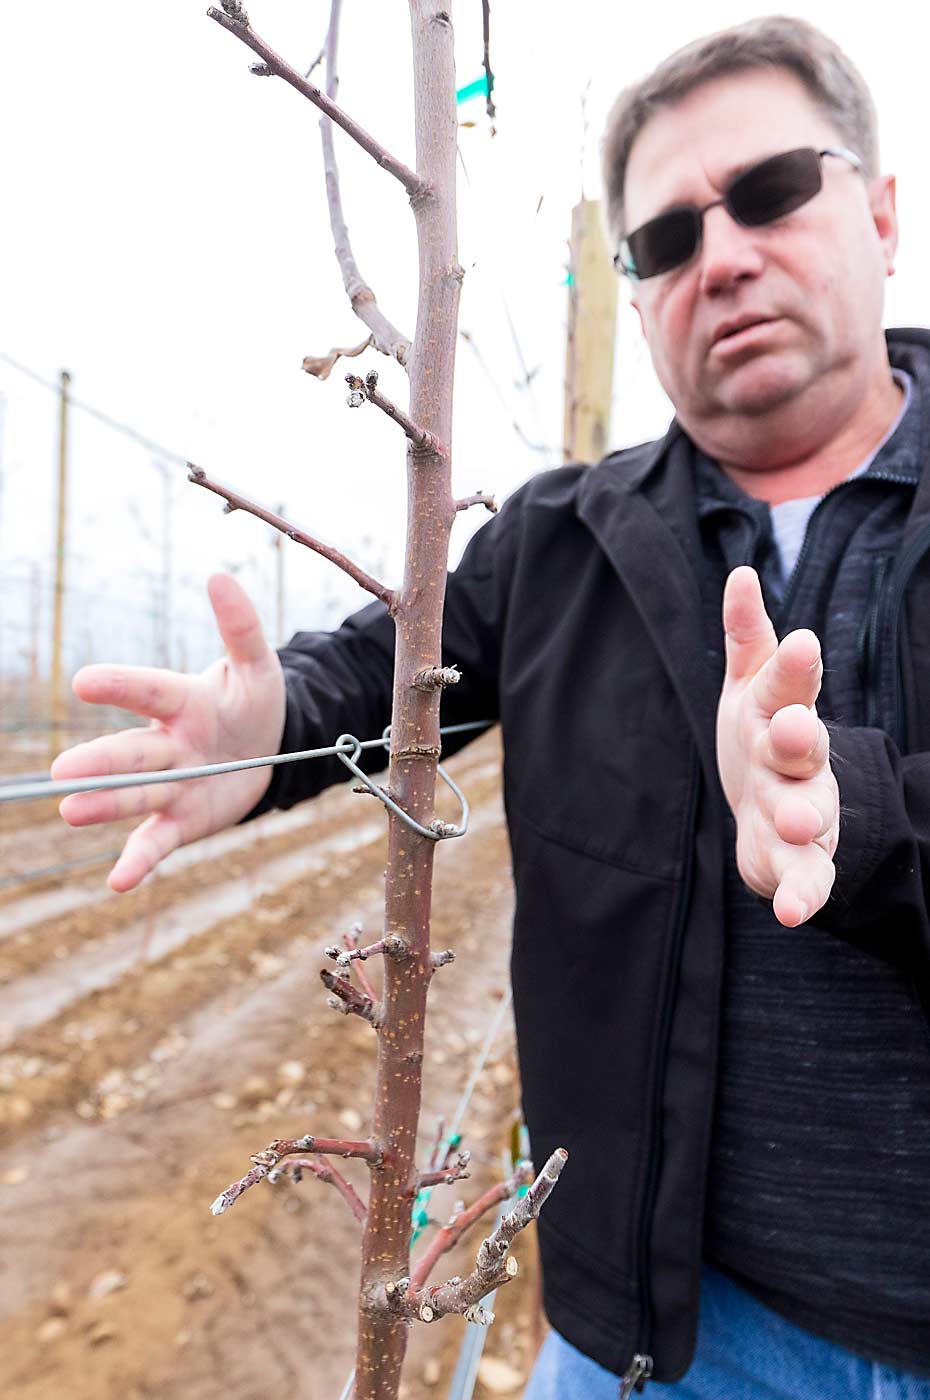 Goldy expects to manage a canopy of about 10 inches on either side of the tree. Click pruning will promote renewal of fruiting wood while keeping the production in this narrow box. (TJ Mullinax/Good Fruit Grower)